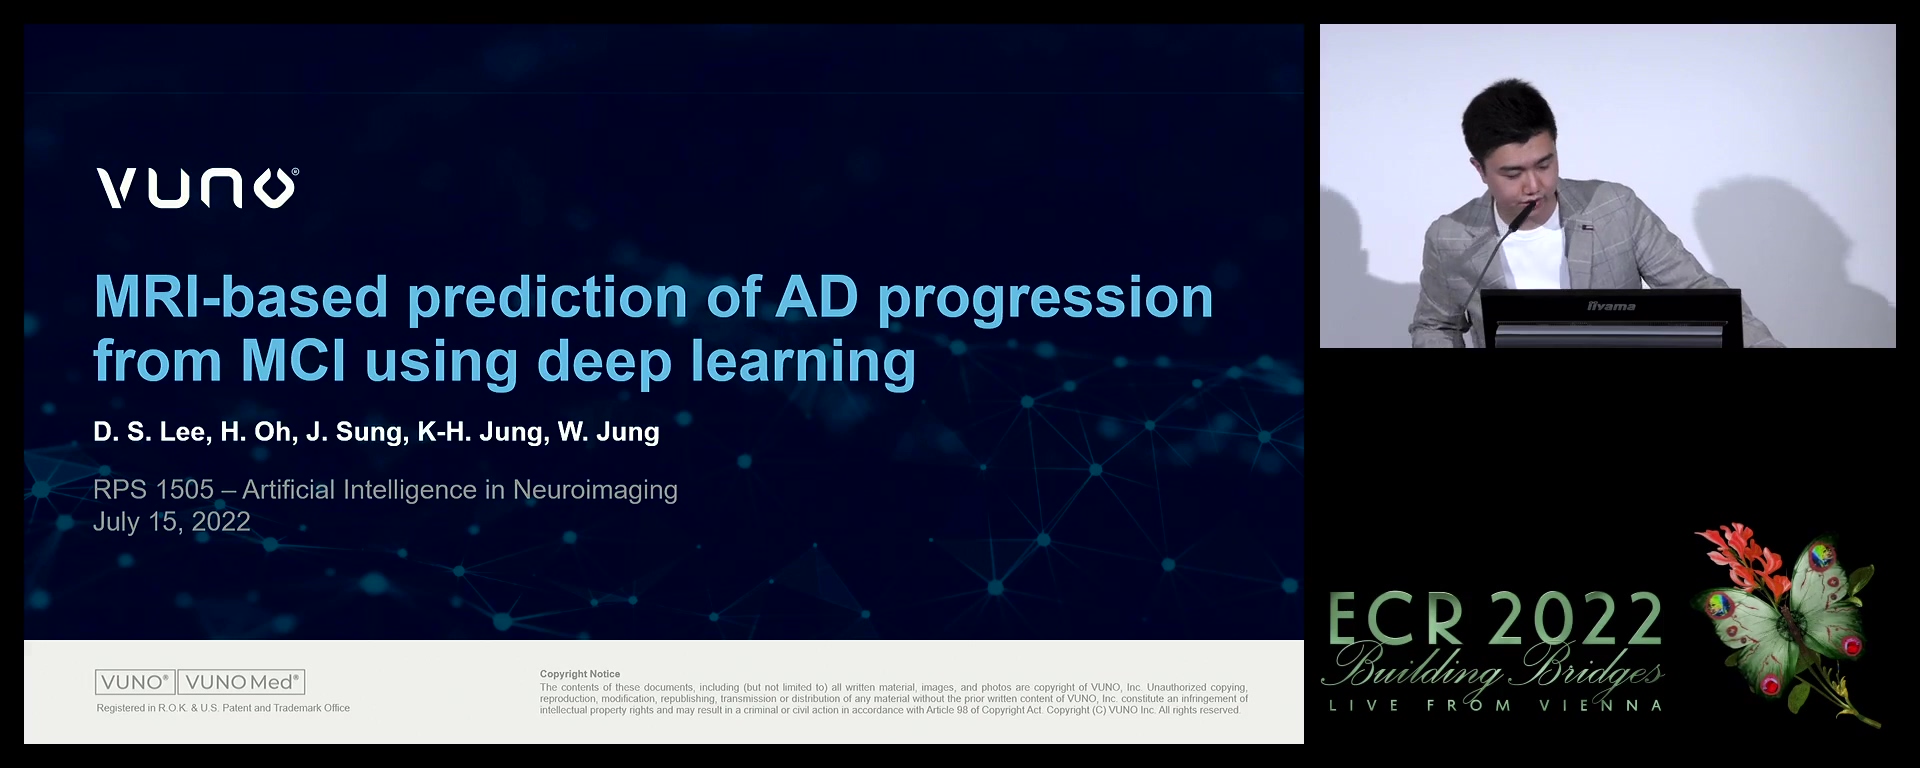 MRI-based prediction of AD progression from MCI using deep learning - Wooseok Jung, Seoul / KR